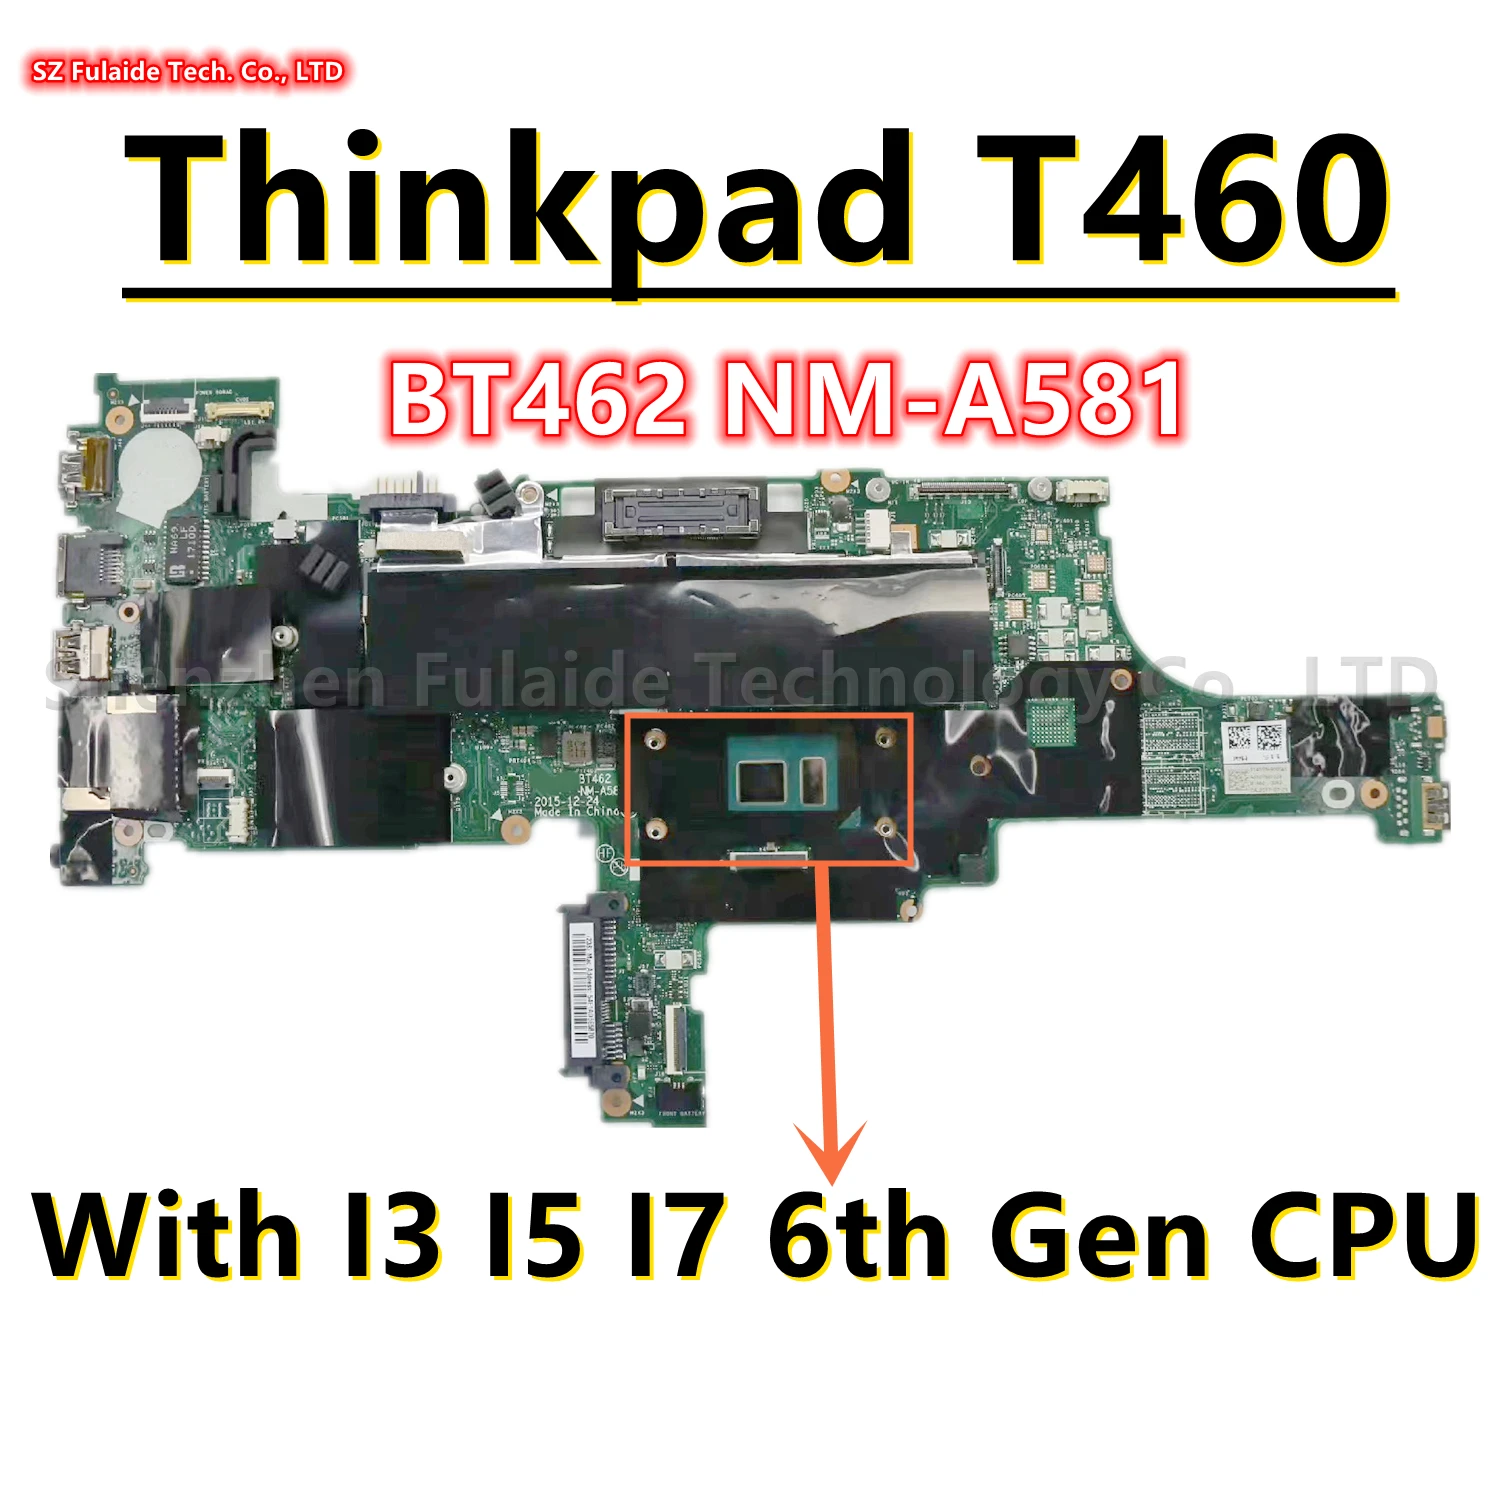 

BT462 NM-A581 For Lenovo Thinkpad T460 Laotop Motherboard With I3 I5 I7 6th Gen CPU 01AW336 01AW344 01HW836 01HW835 100% OK